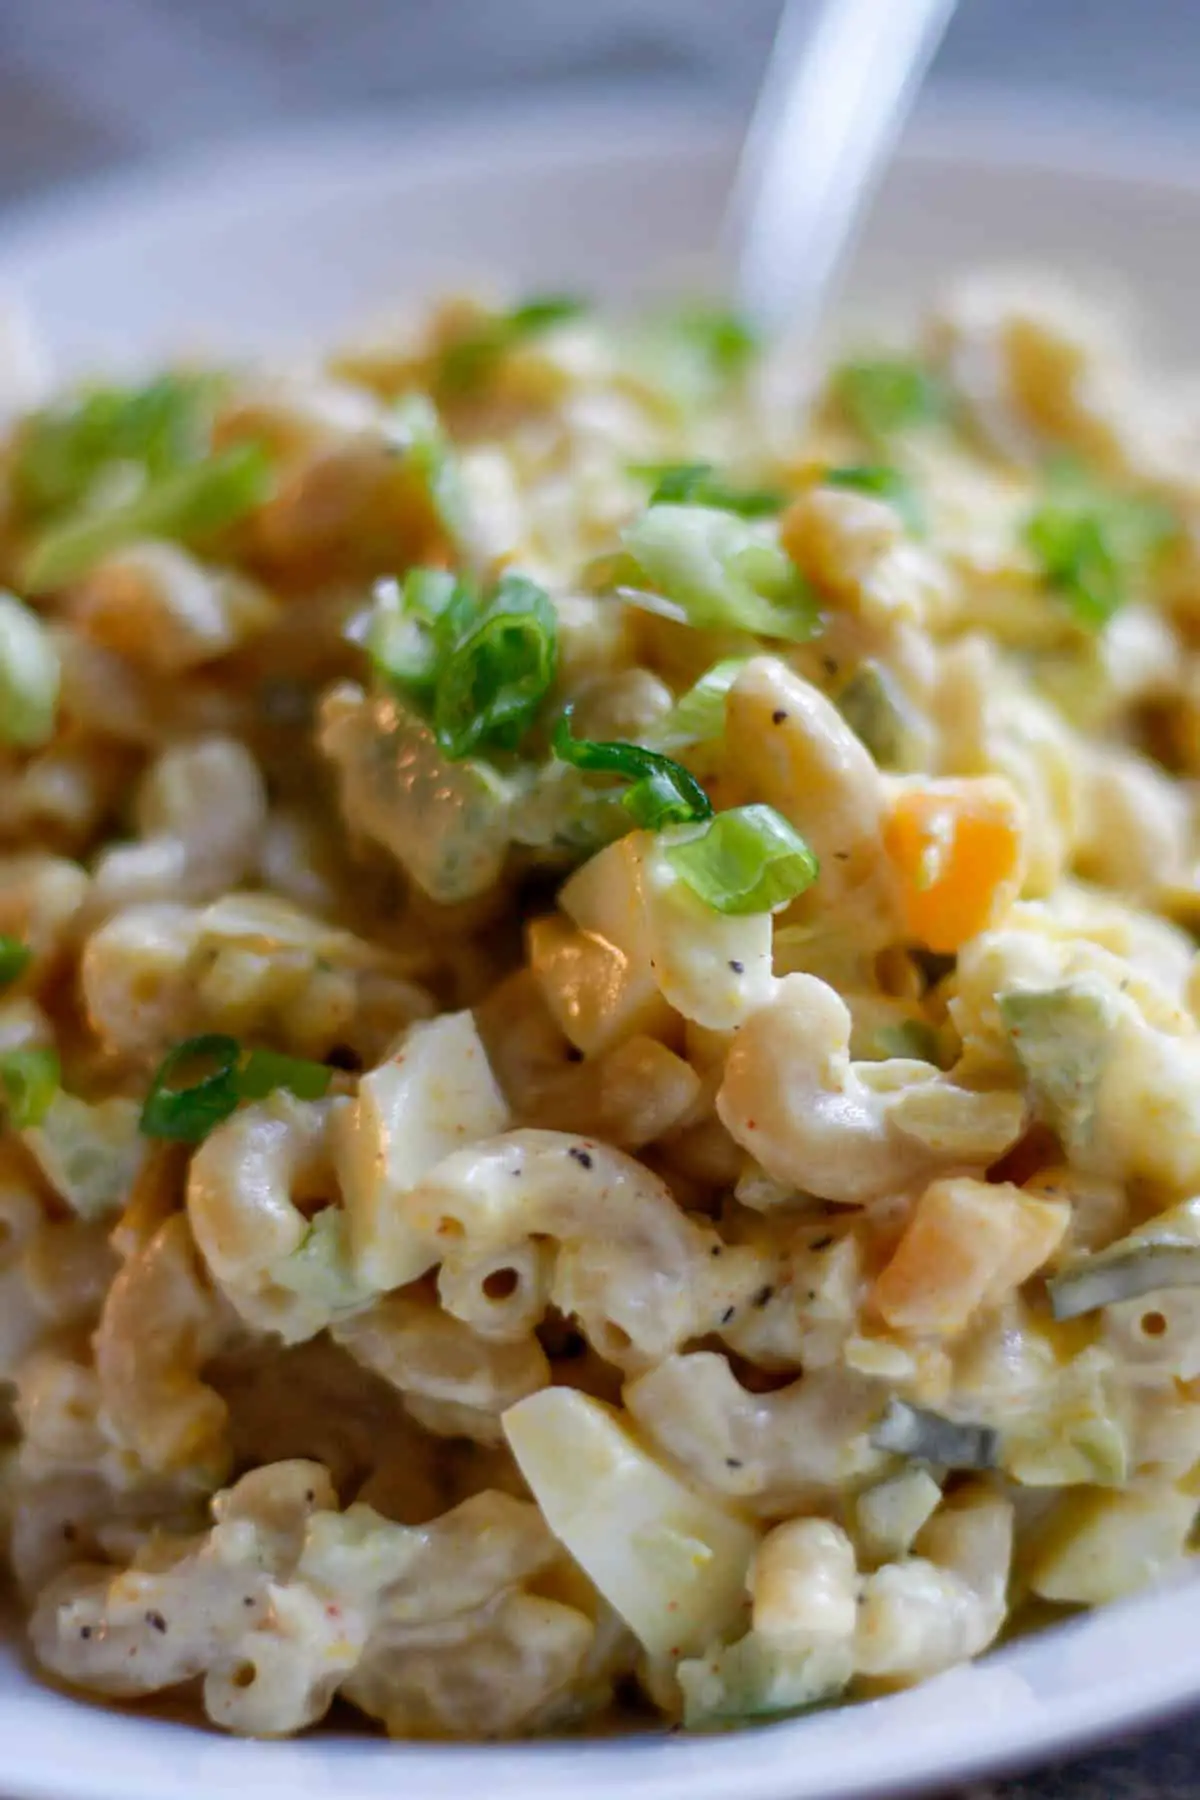 Southern macaroni salad with eggs and mayo garnished with green onions in a white dish, with the handle of a spoon visible in the background.